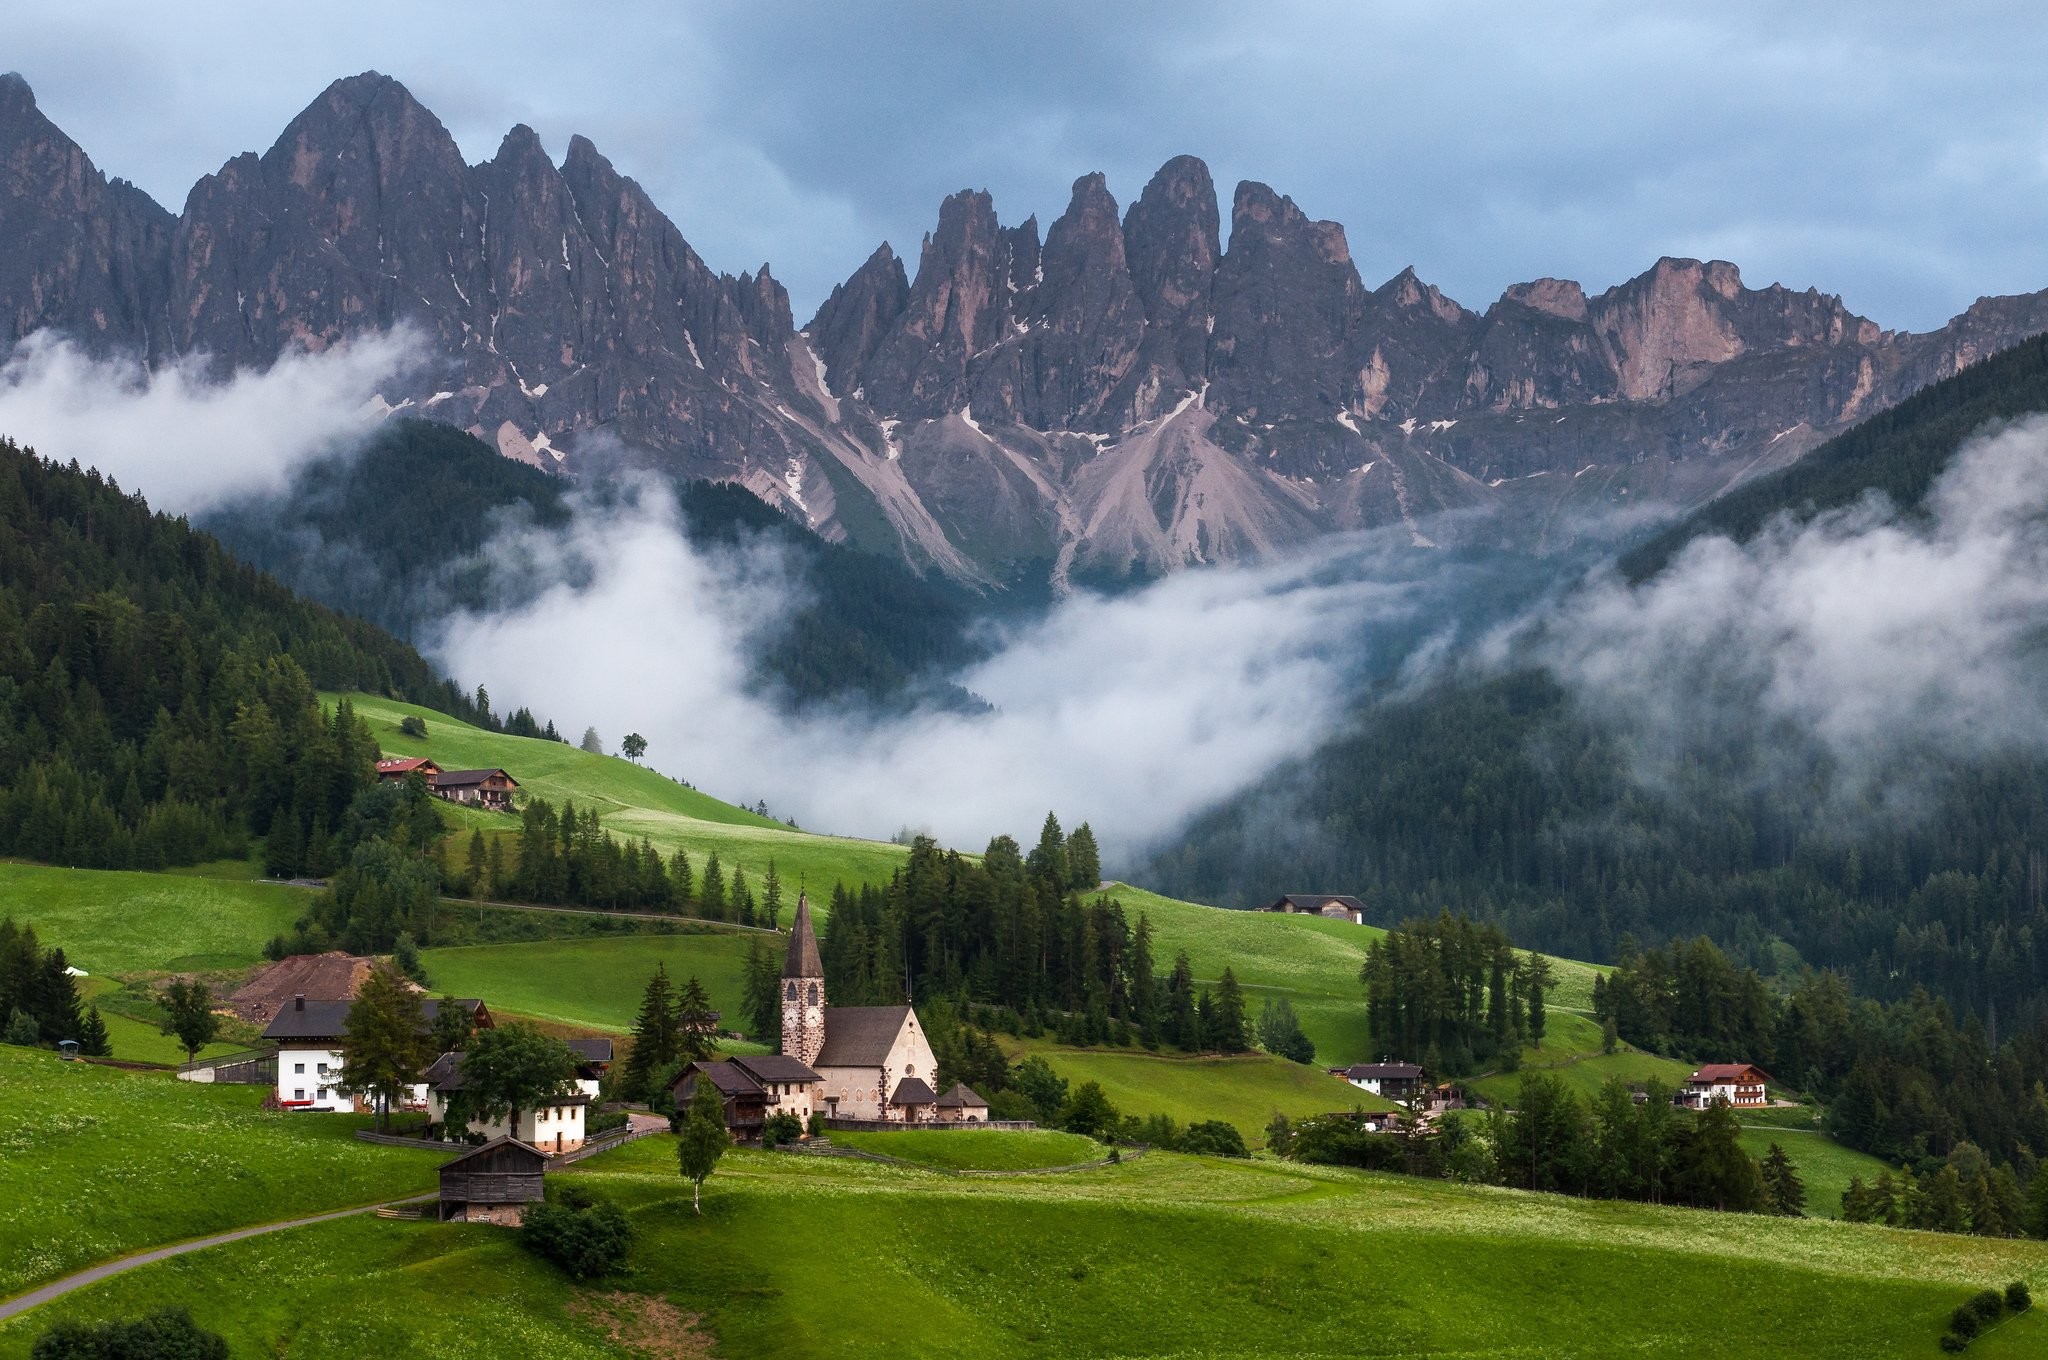 2048x1360 dolomiti, dolomites, mountains, clouds, forest, trees, grass, church, home,  nature, landscape Wallpaper HD